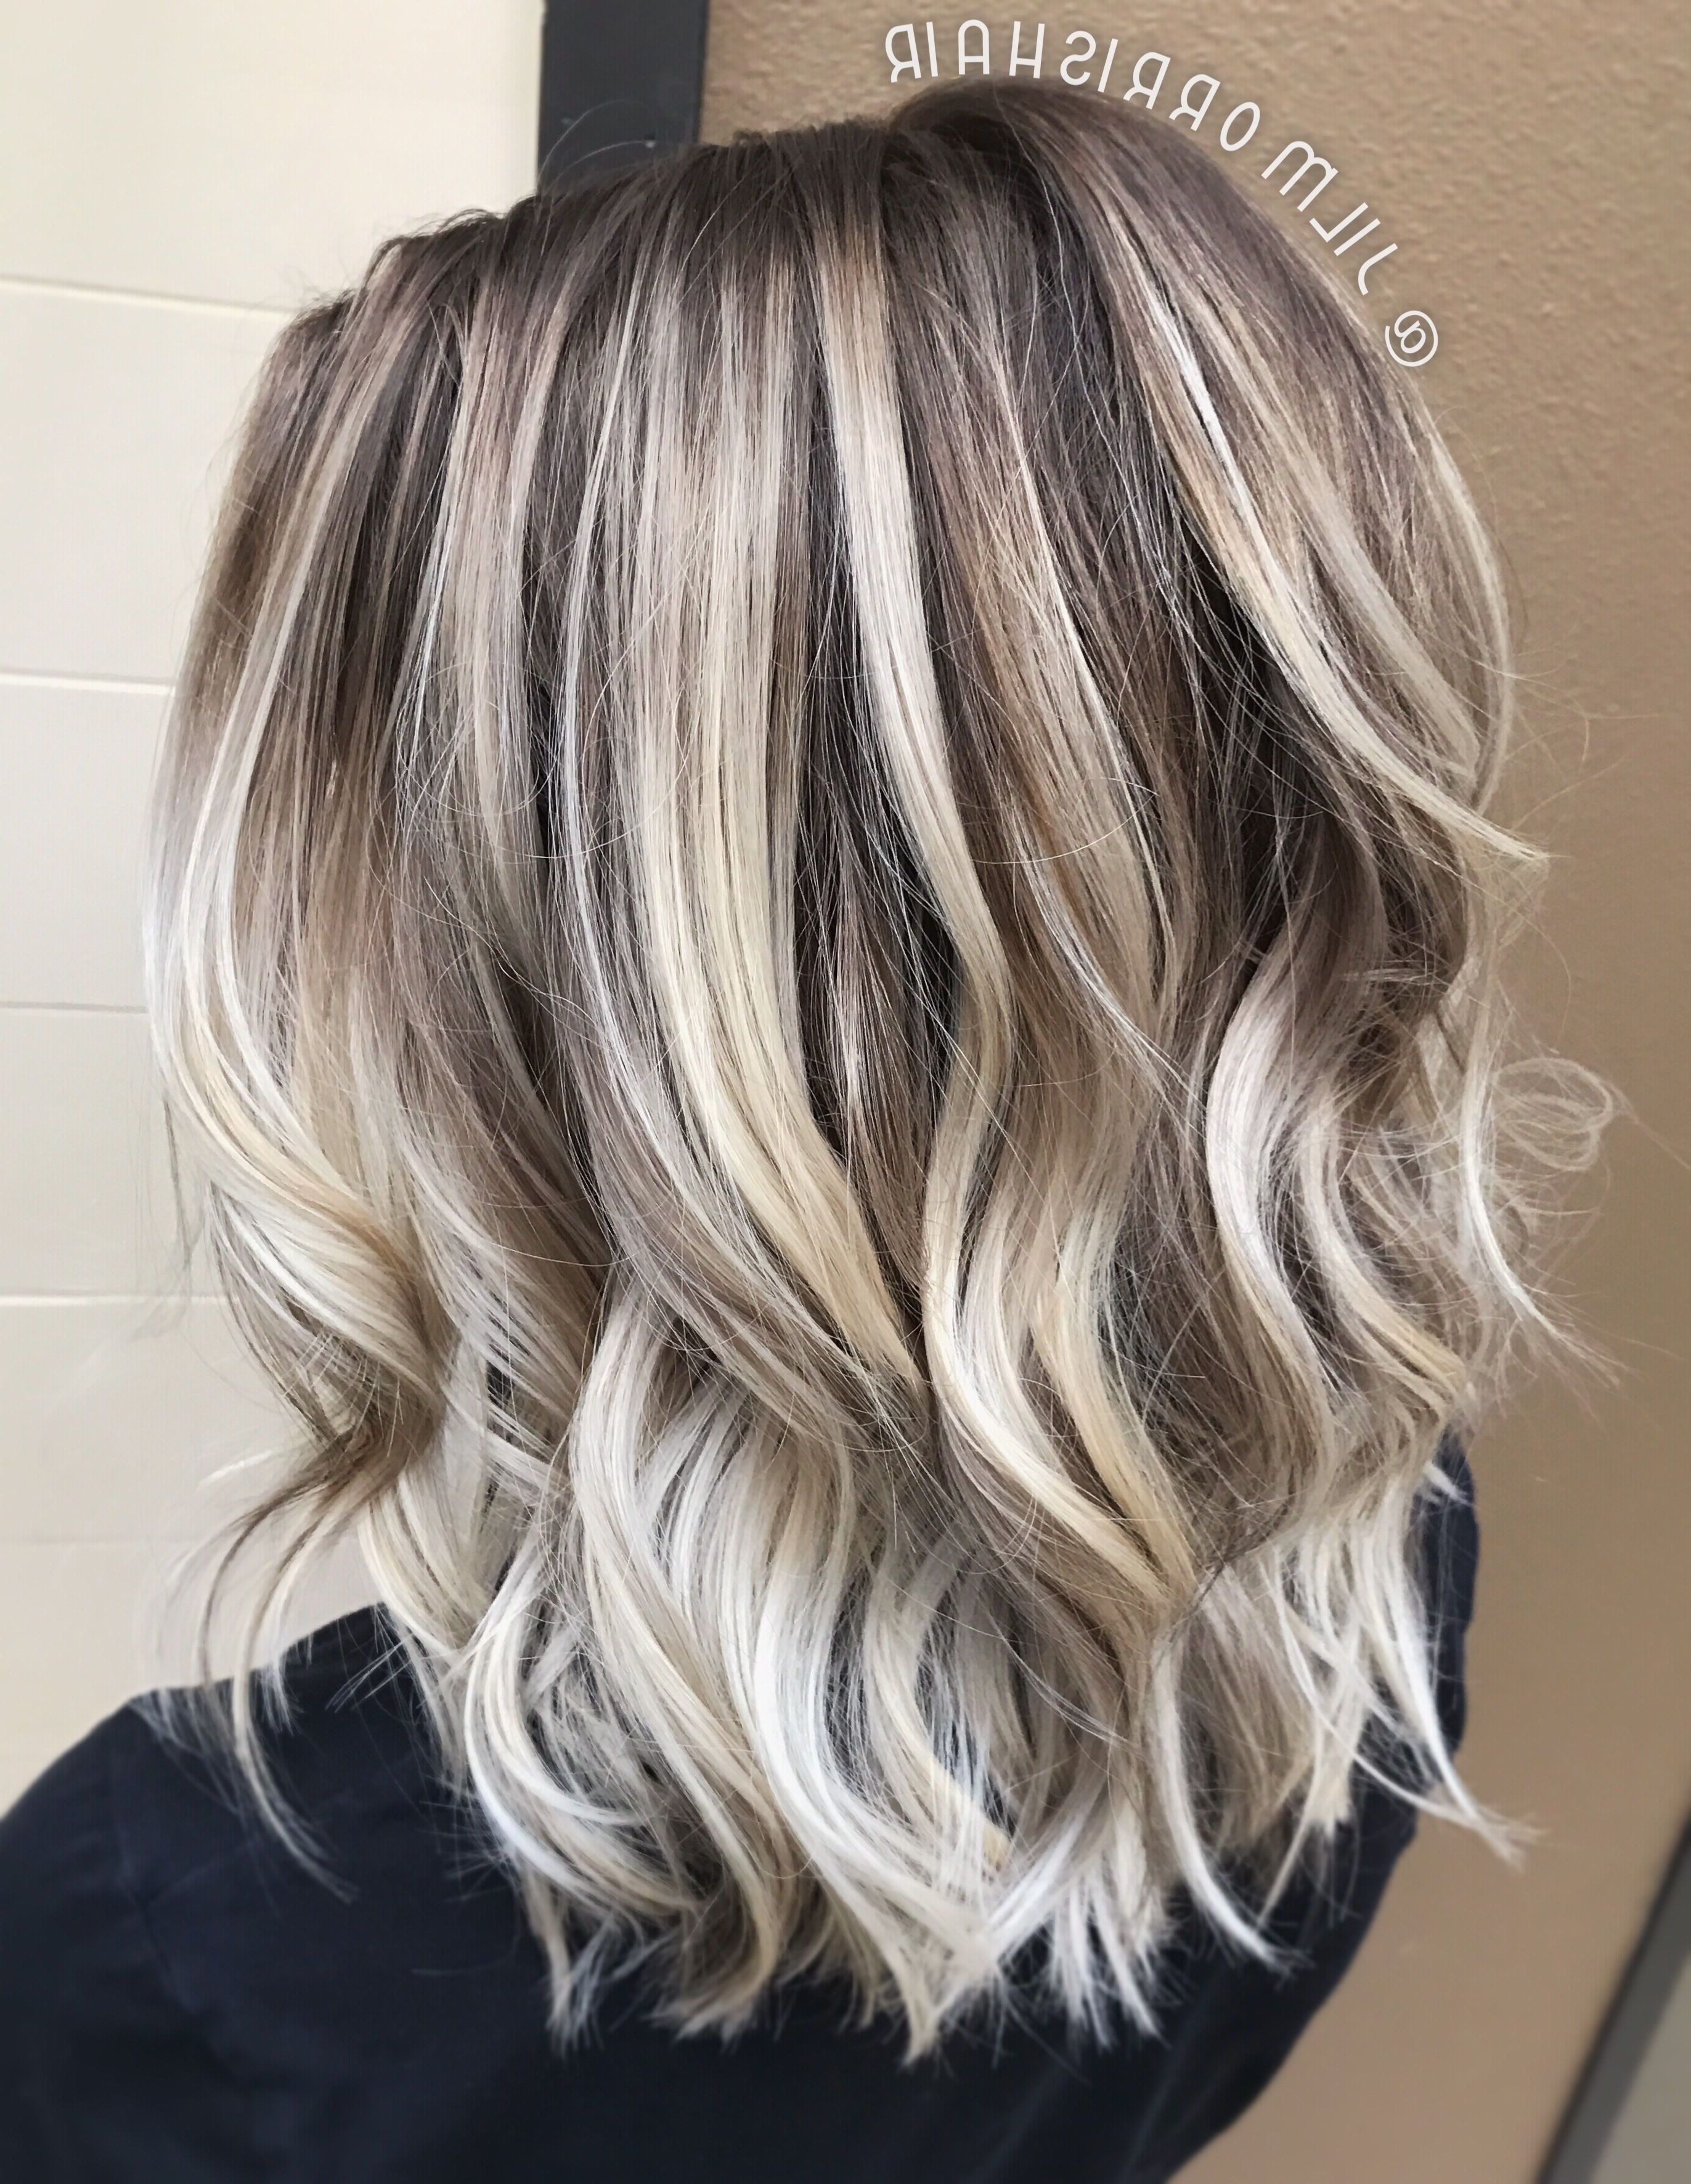 Popular Icy Ombre Waves Blonde Hairstyles Pertaining To Cool Icy Ashy Blonde Balayage Highlights, Shadow Root, Waves And (View 1 of 20)